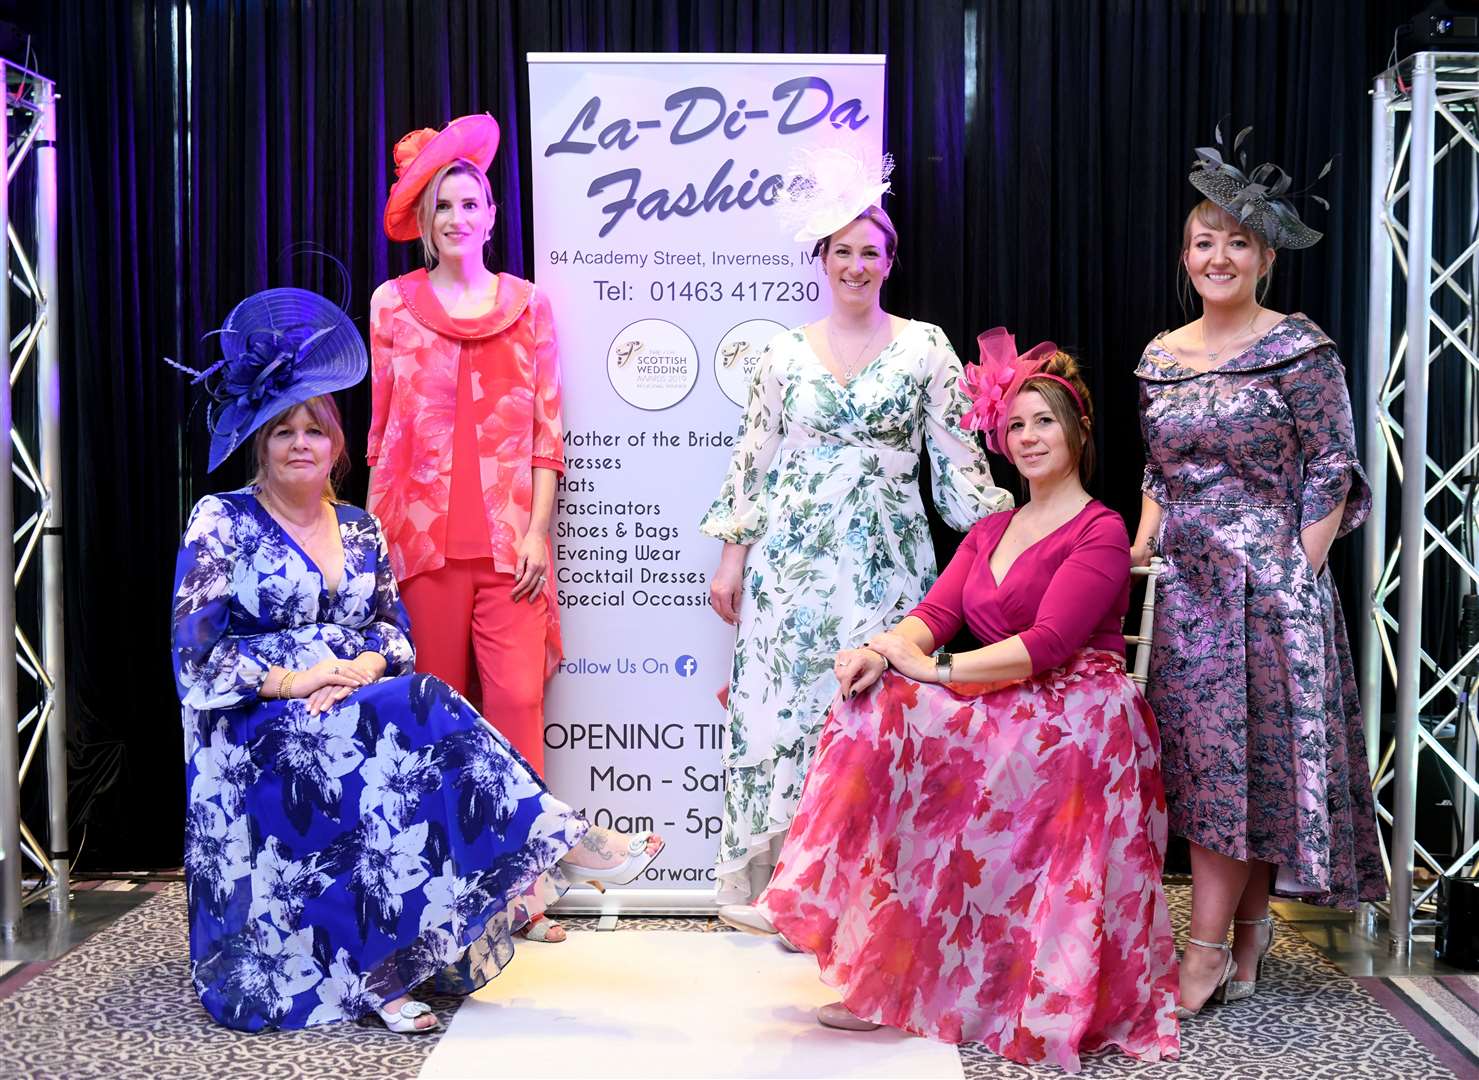 Plenty to choose from for the mother of the bride on show from La-Di-Da Fashion. Picture: James Mackenzie